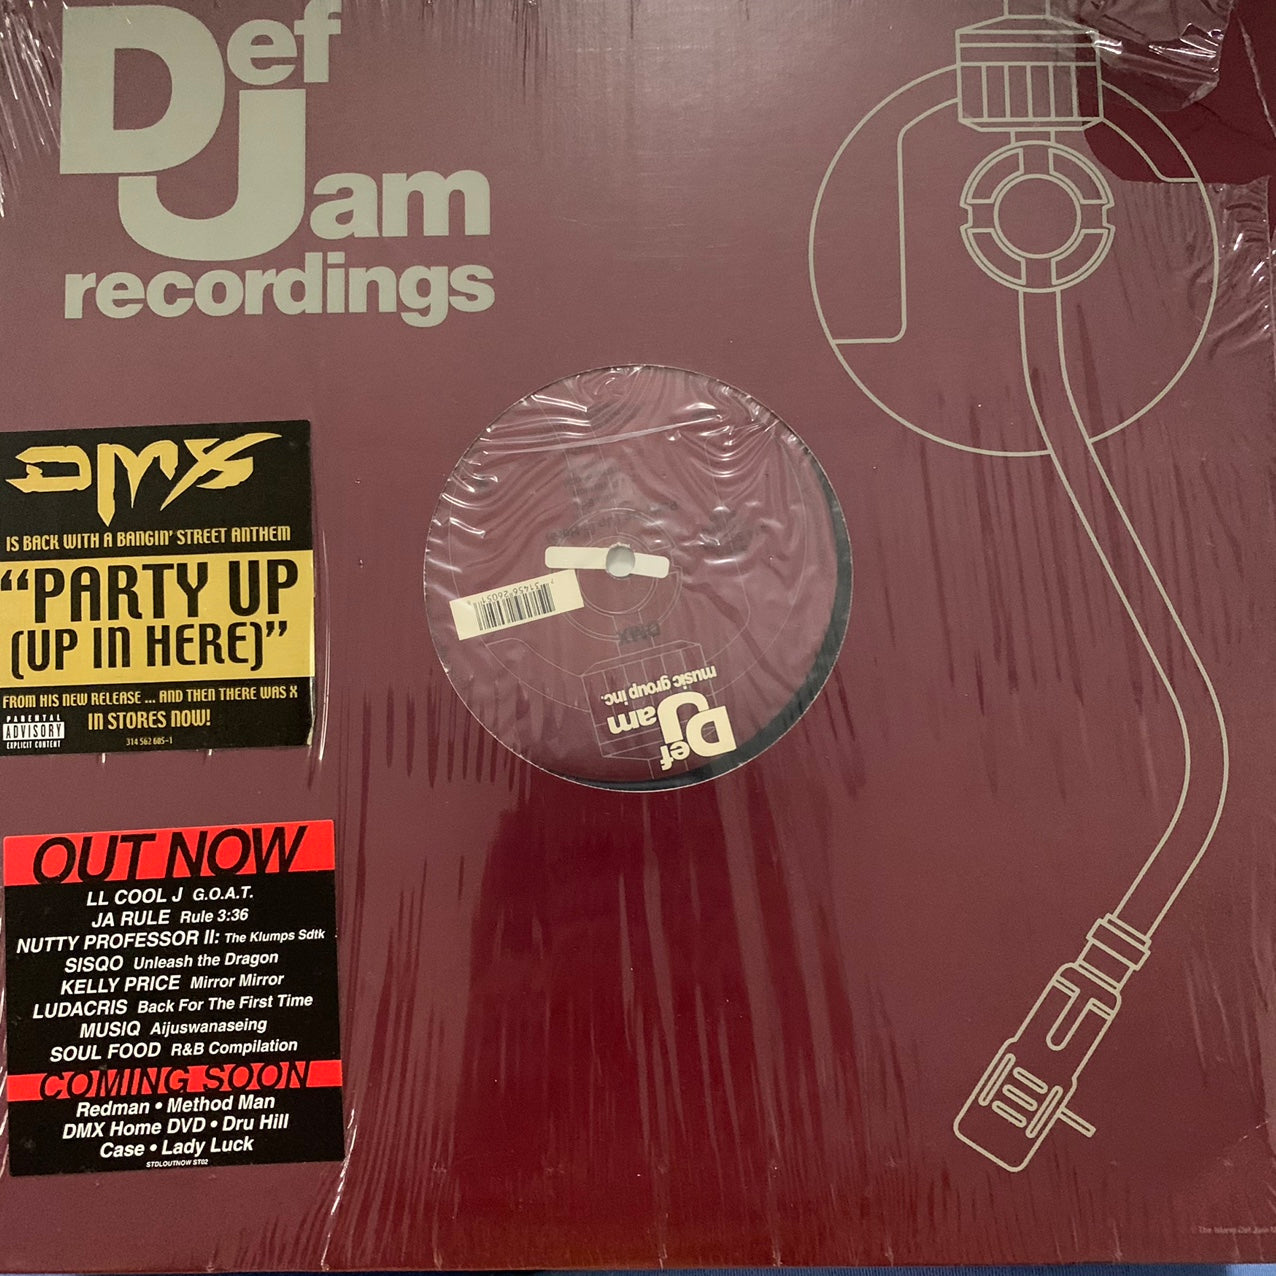 DMX Where “Party Up ( Up In Here )” 12 Inch Vinyl